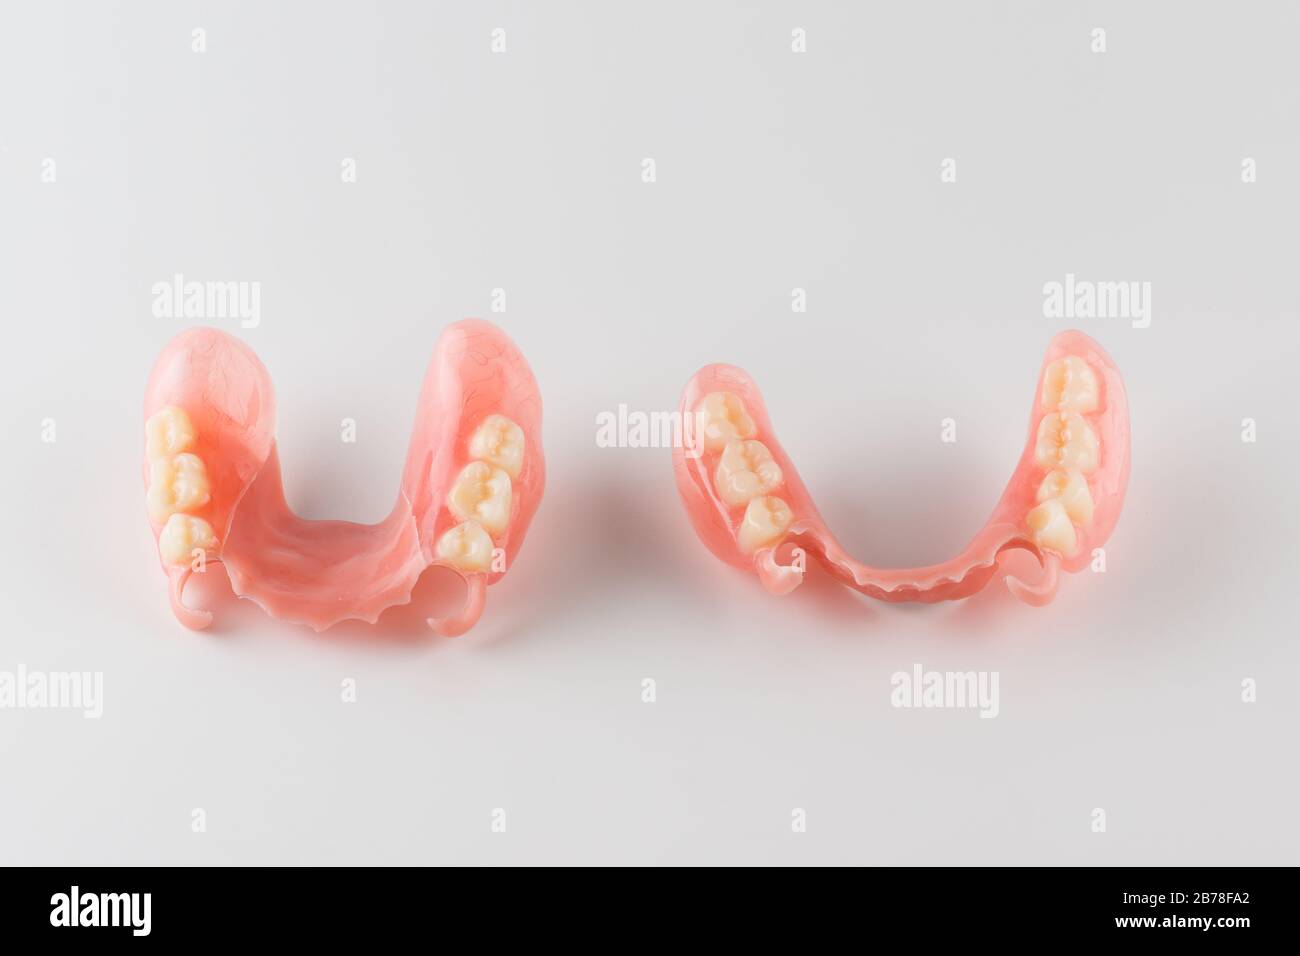 large image of a modern denture on a white background Stock Photo